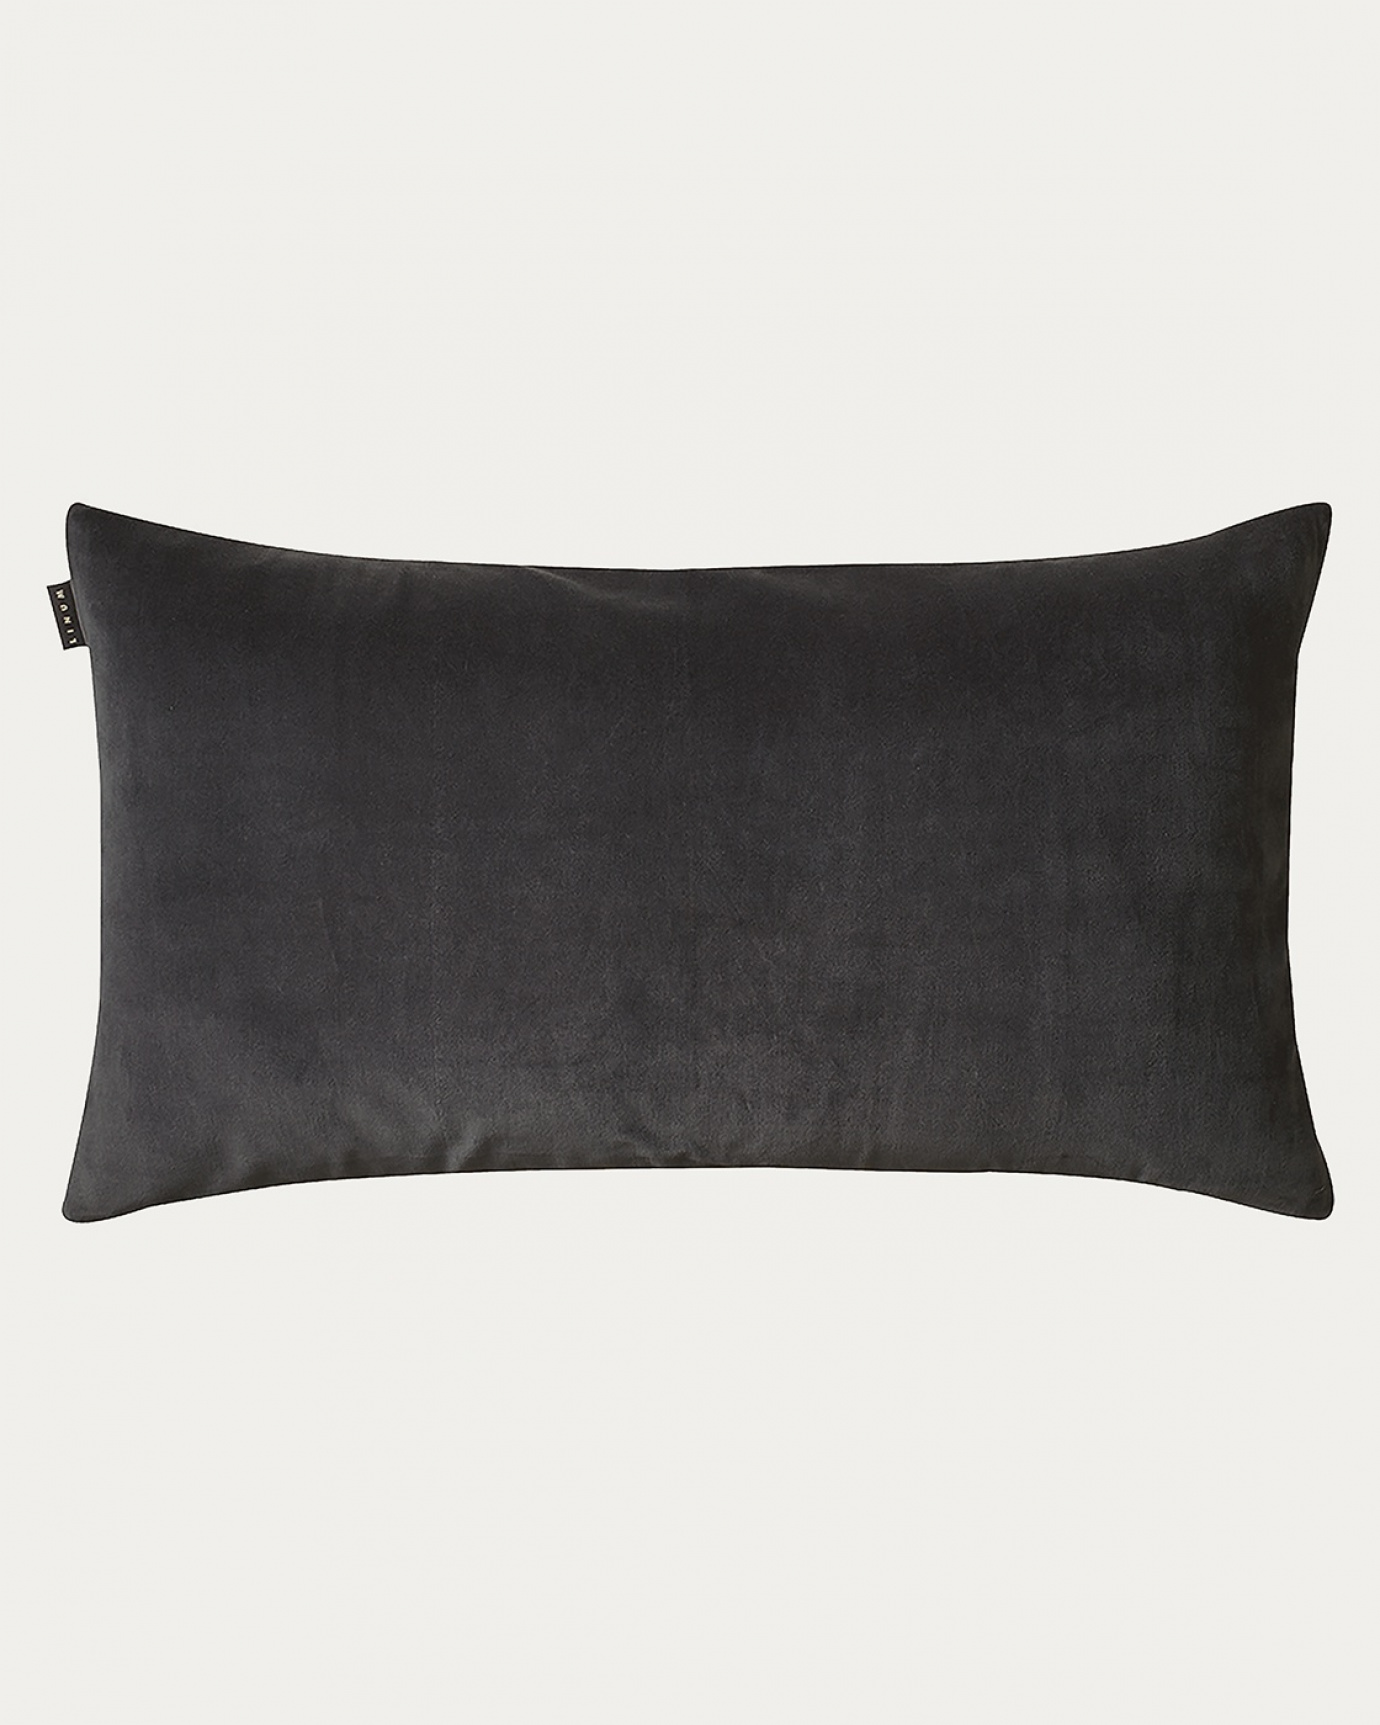 Product image dark charcoal grey PAOLO cushion cover made of soft cotton velvet and 100% linen from LINUM DESIGN. Size 50x90 cm.